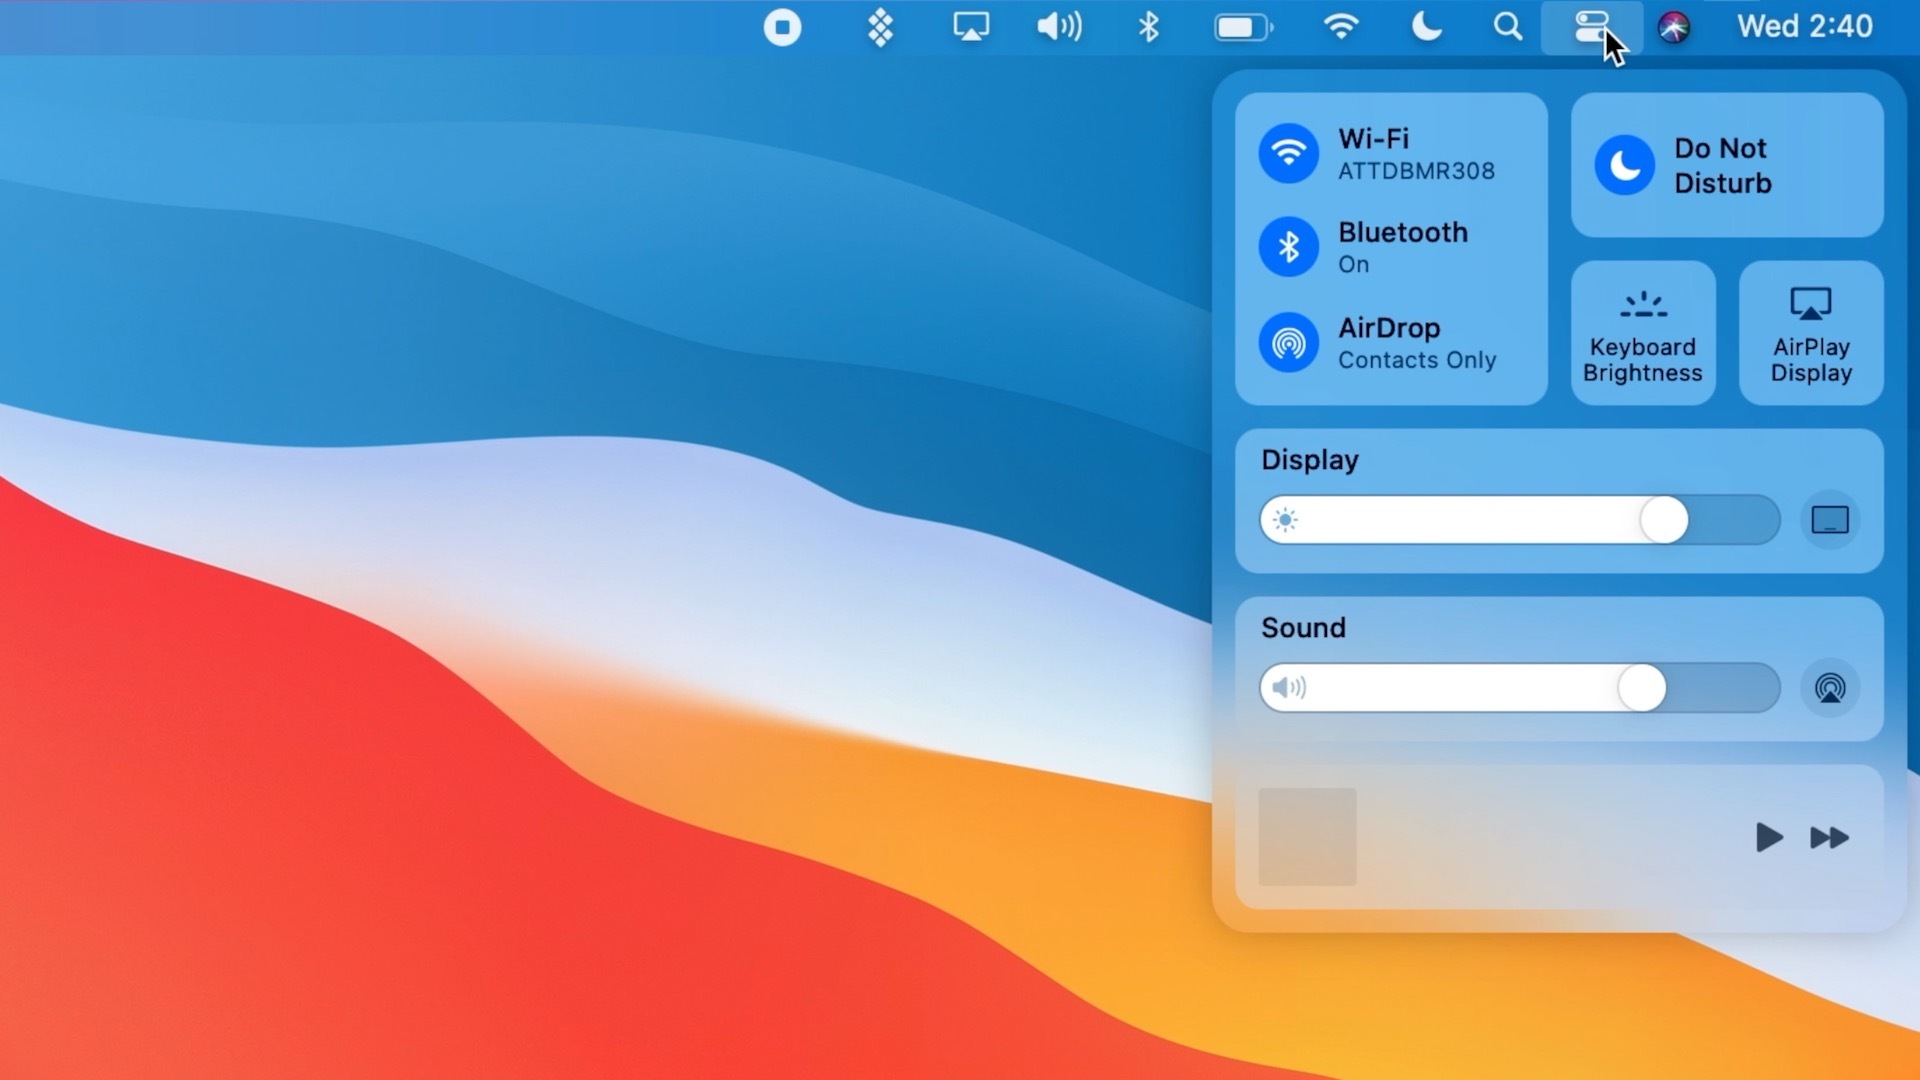 First Look Macos Big Sur With Redesign Safari Updates New Messages App And More Macrumors Forums